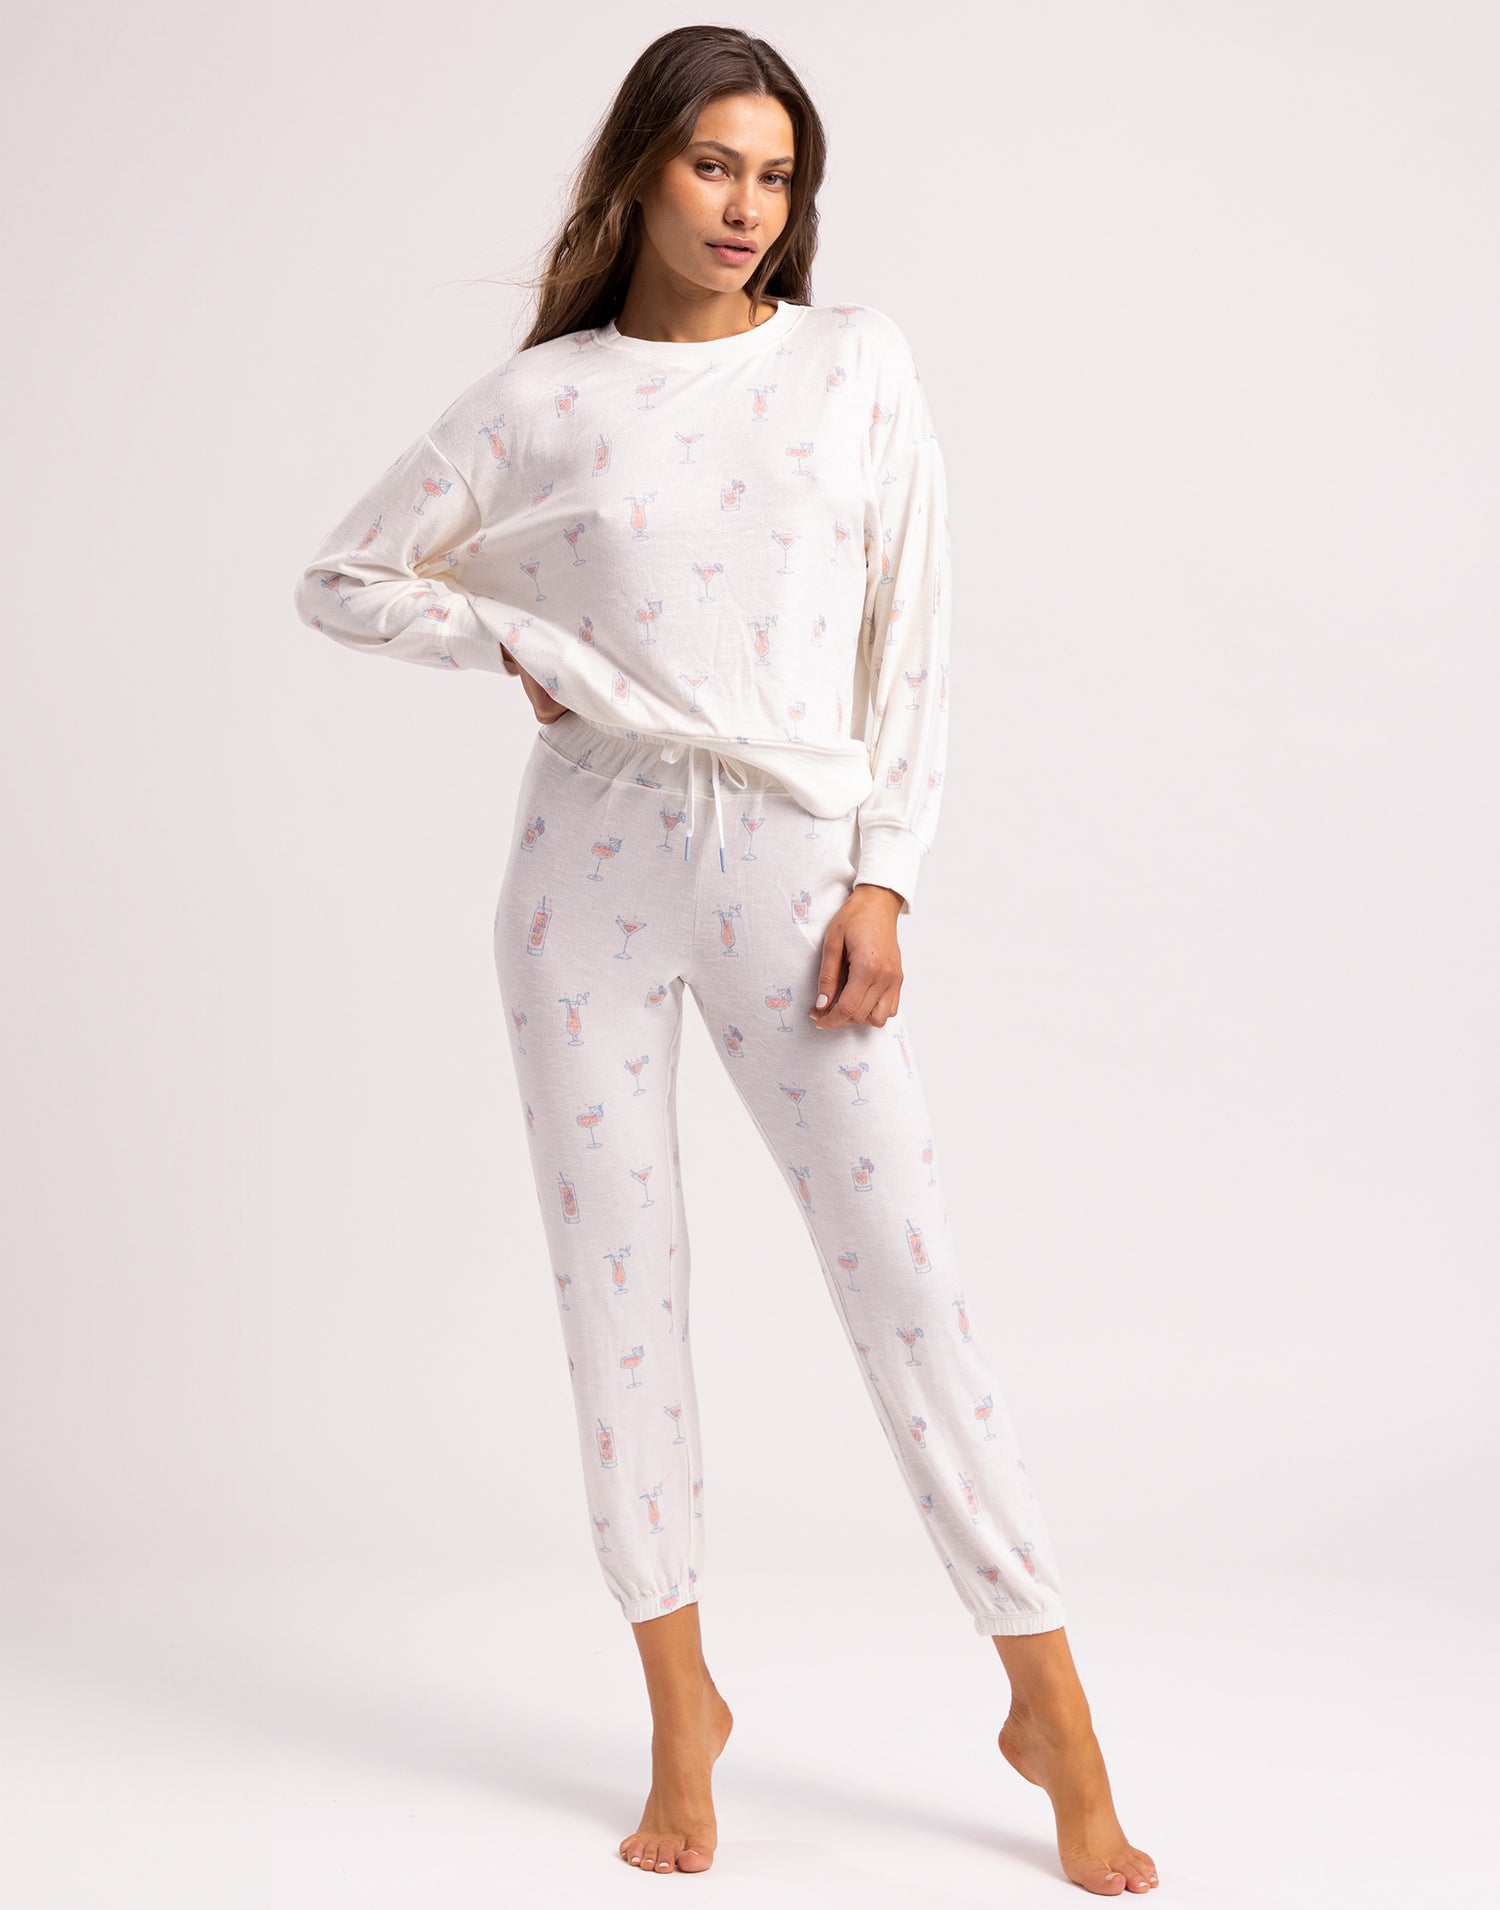 Happy Hour Cocktails Long Sleeve Lounge Top by Z Supply in Cloud Dancer - Front View